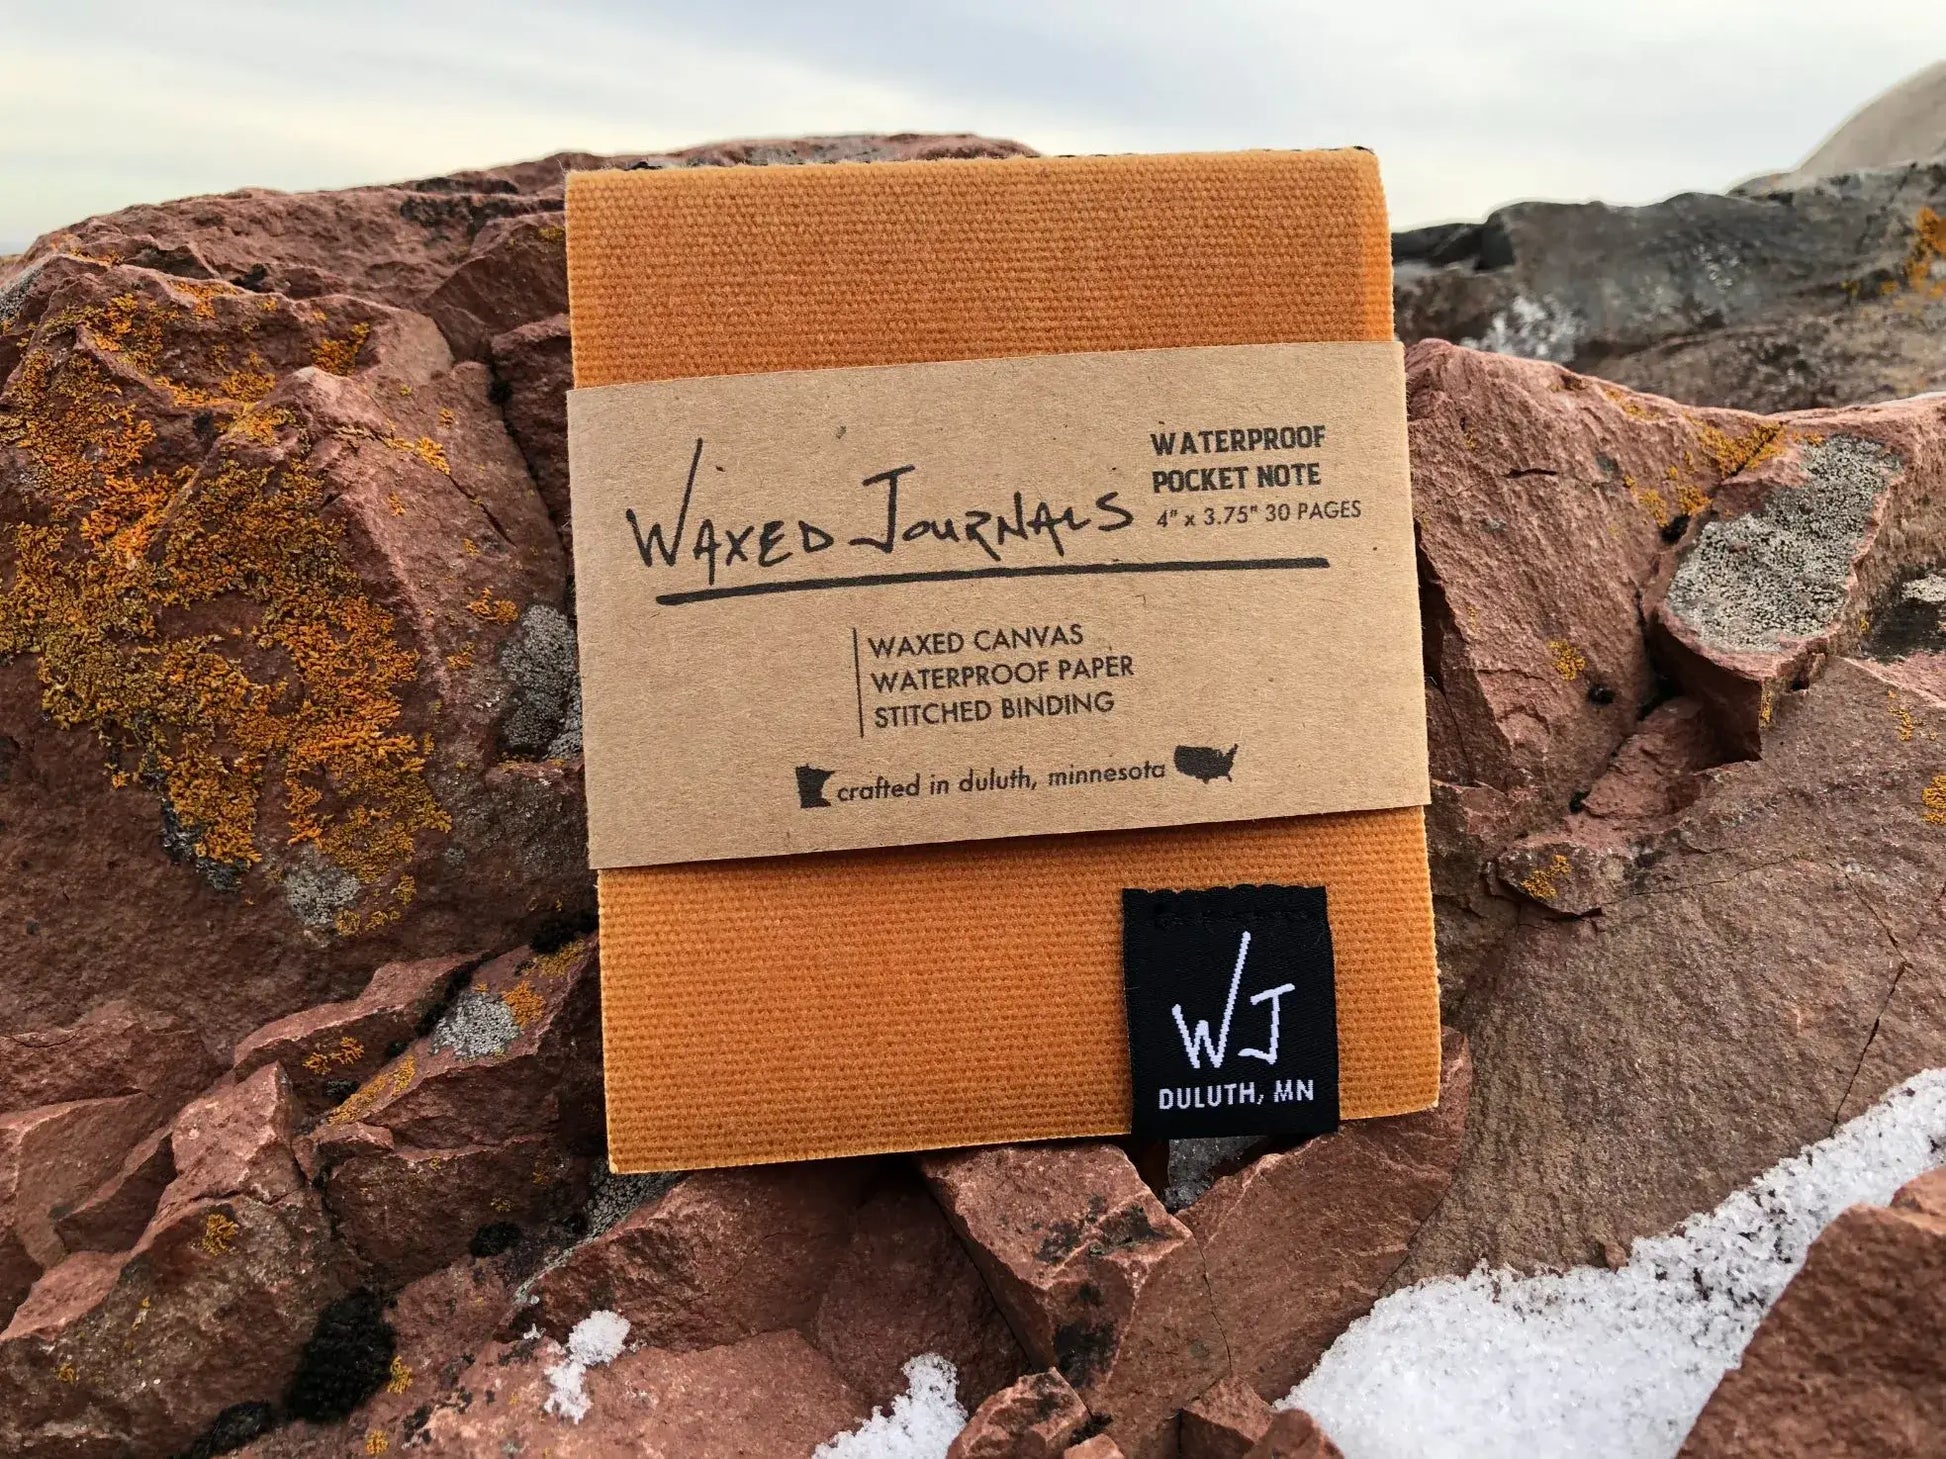 Yellow waxed journal notepad with packaging on rocks.